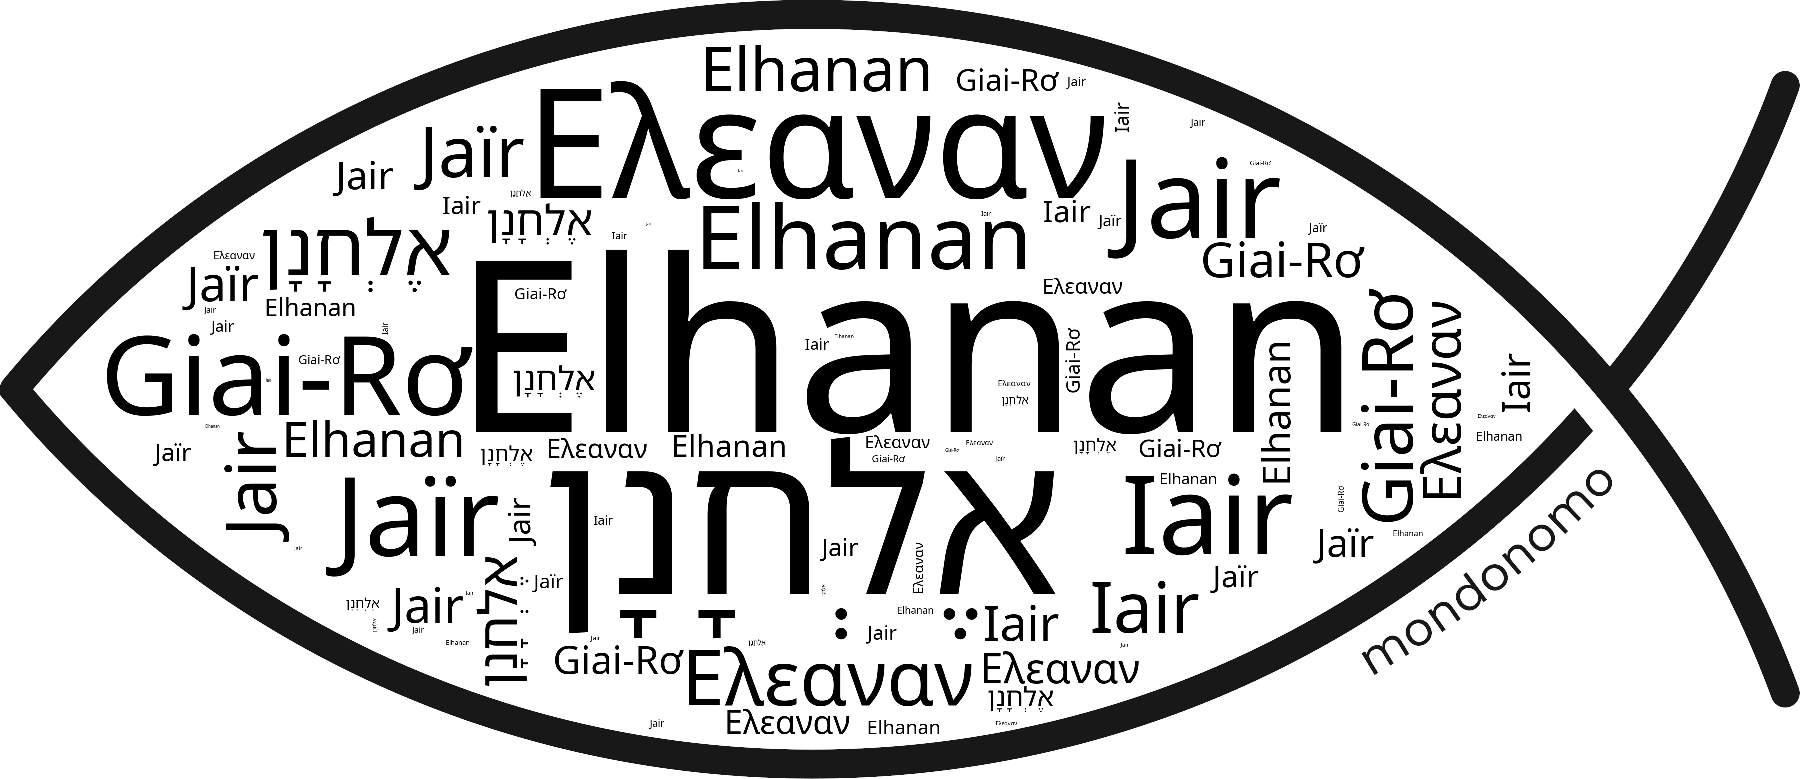 Name Elhanan in the world's Bibles